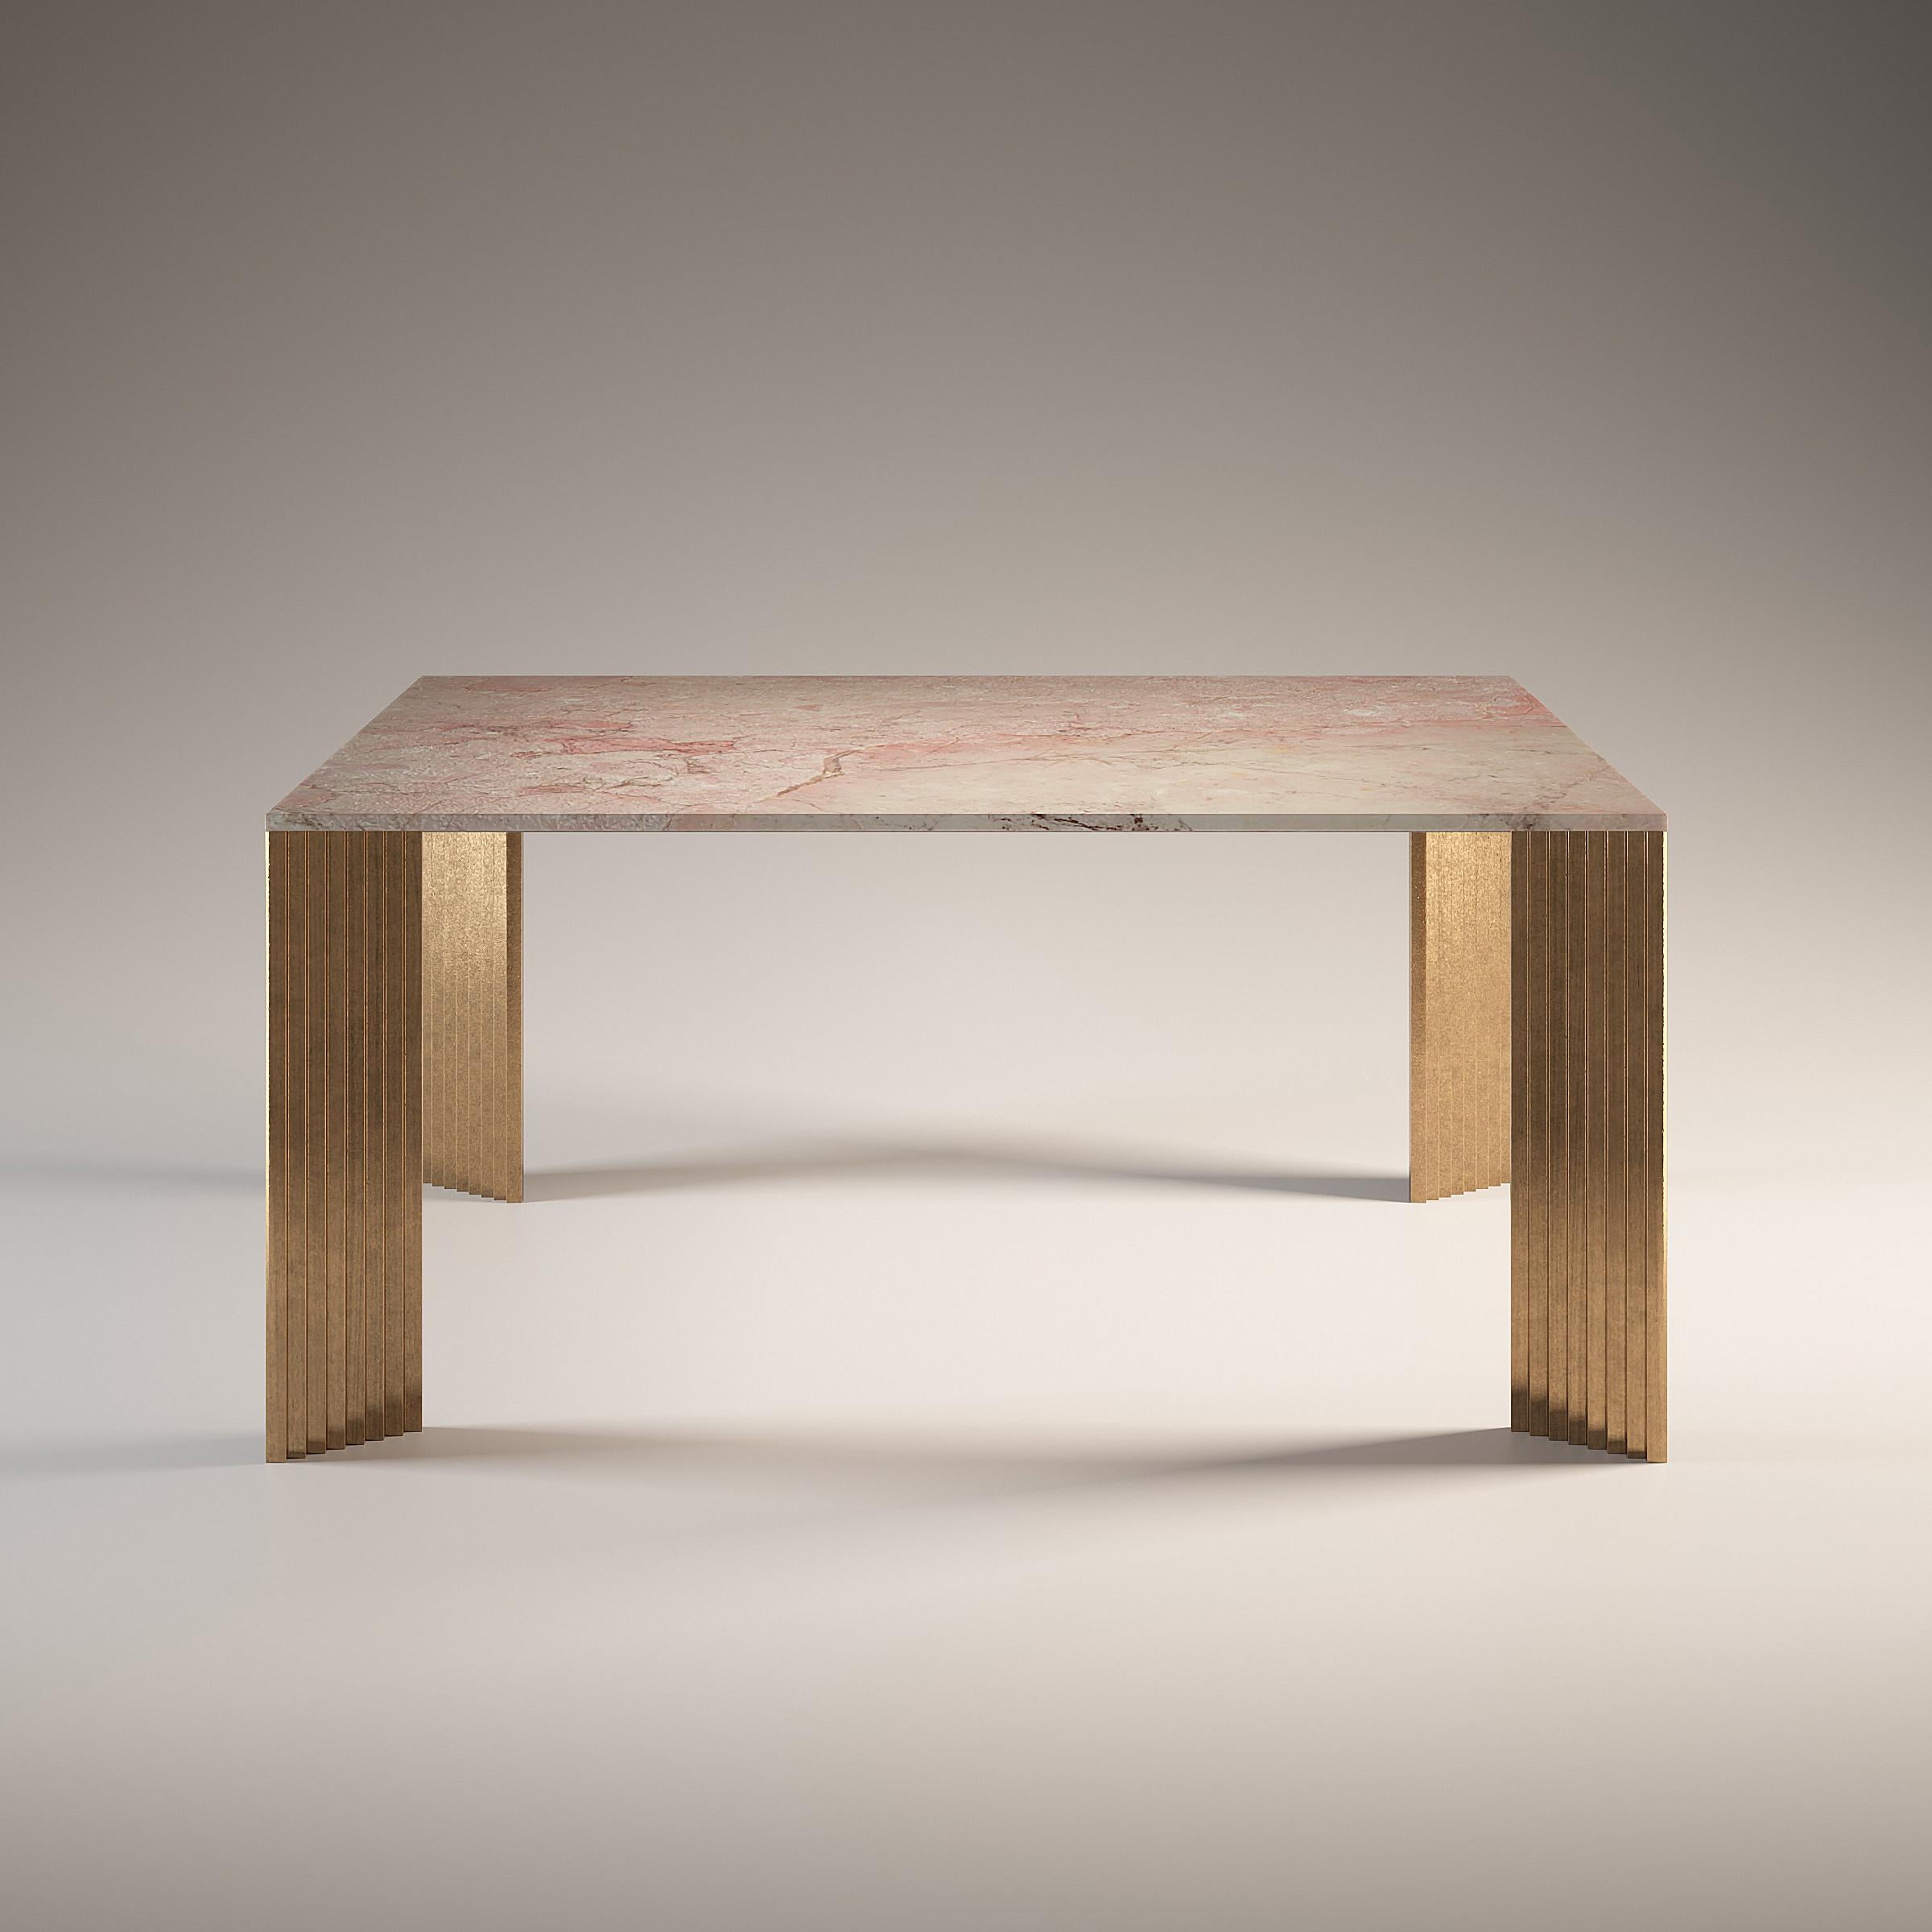 Piero Rosa Tea Dining Table by Fred and Juul
Dimensions: D 160 x W 160 x H 74 cm.
Materials: Rosa Tea marble and bronze.

Available in Rosa Tea or Emperador Grey marble tops. Available in bronze or aluminum legs. Custom sizes, materials or finishes